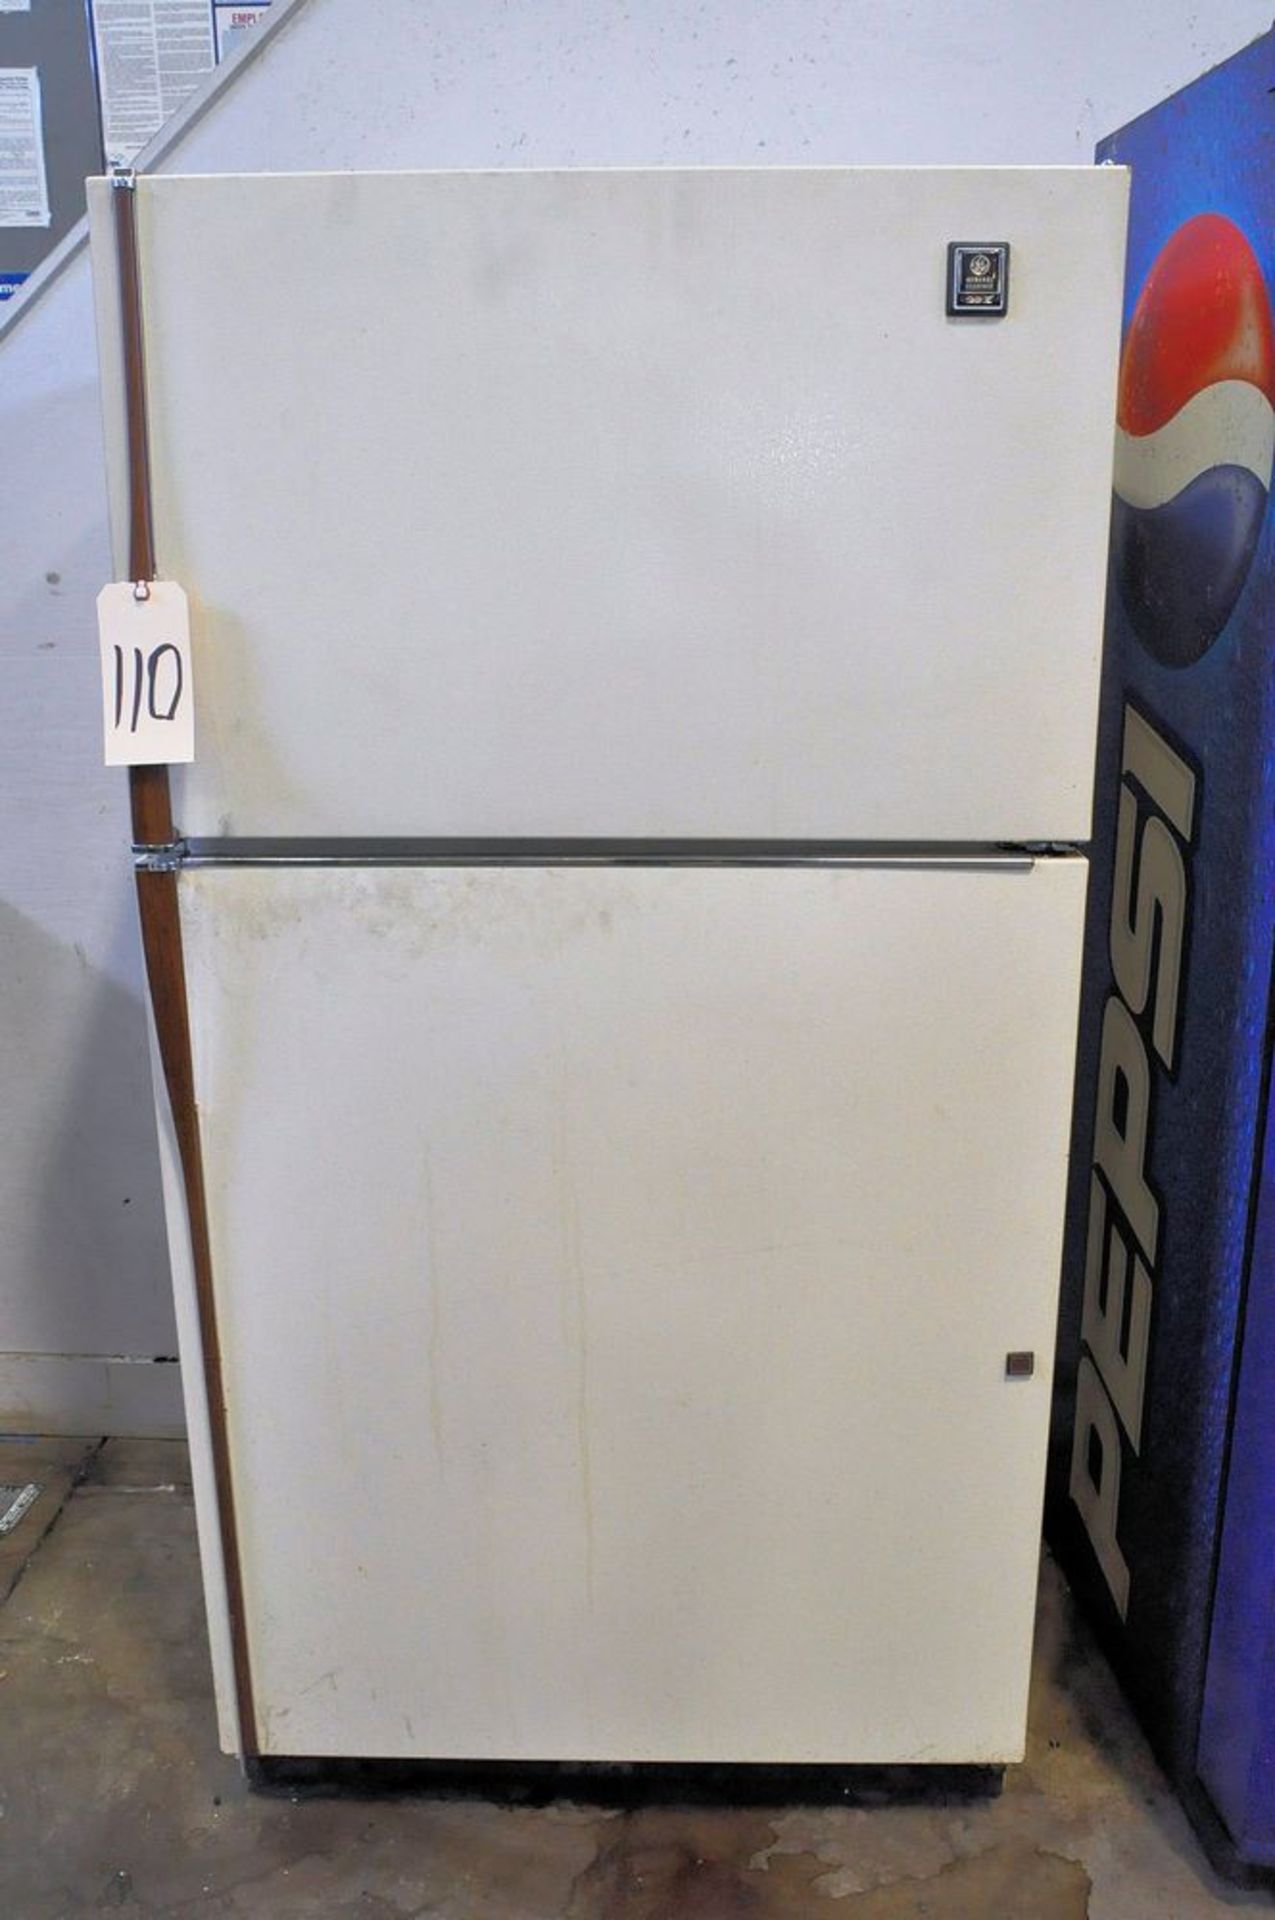 Lot-(1) General Electric Refrigerator, (1) Panasonic Microwave and